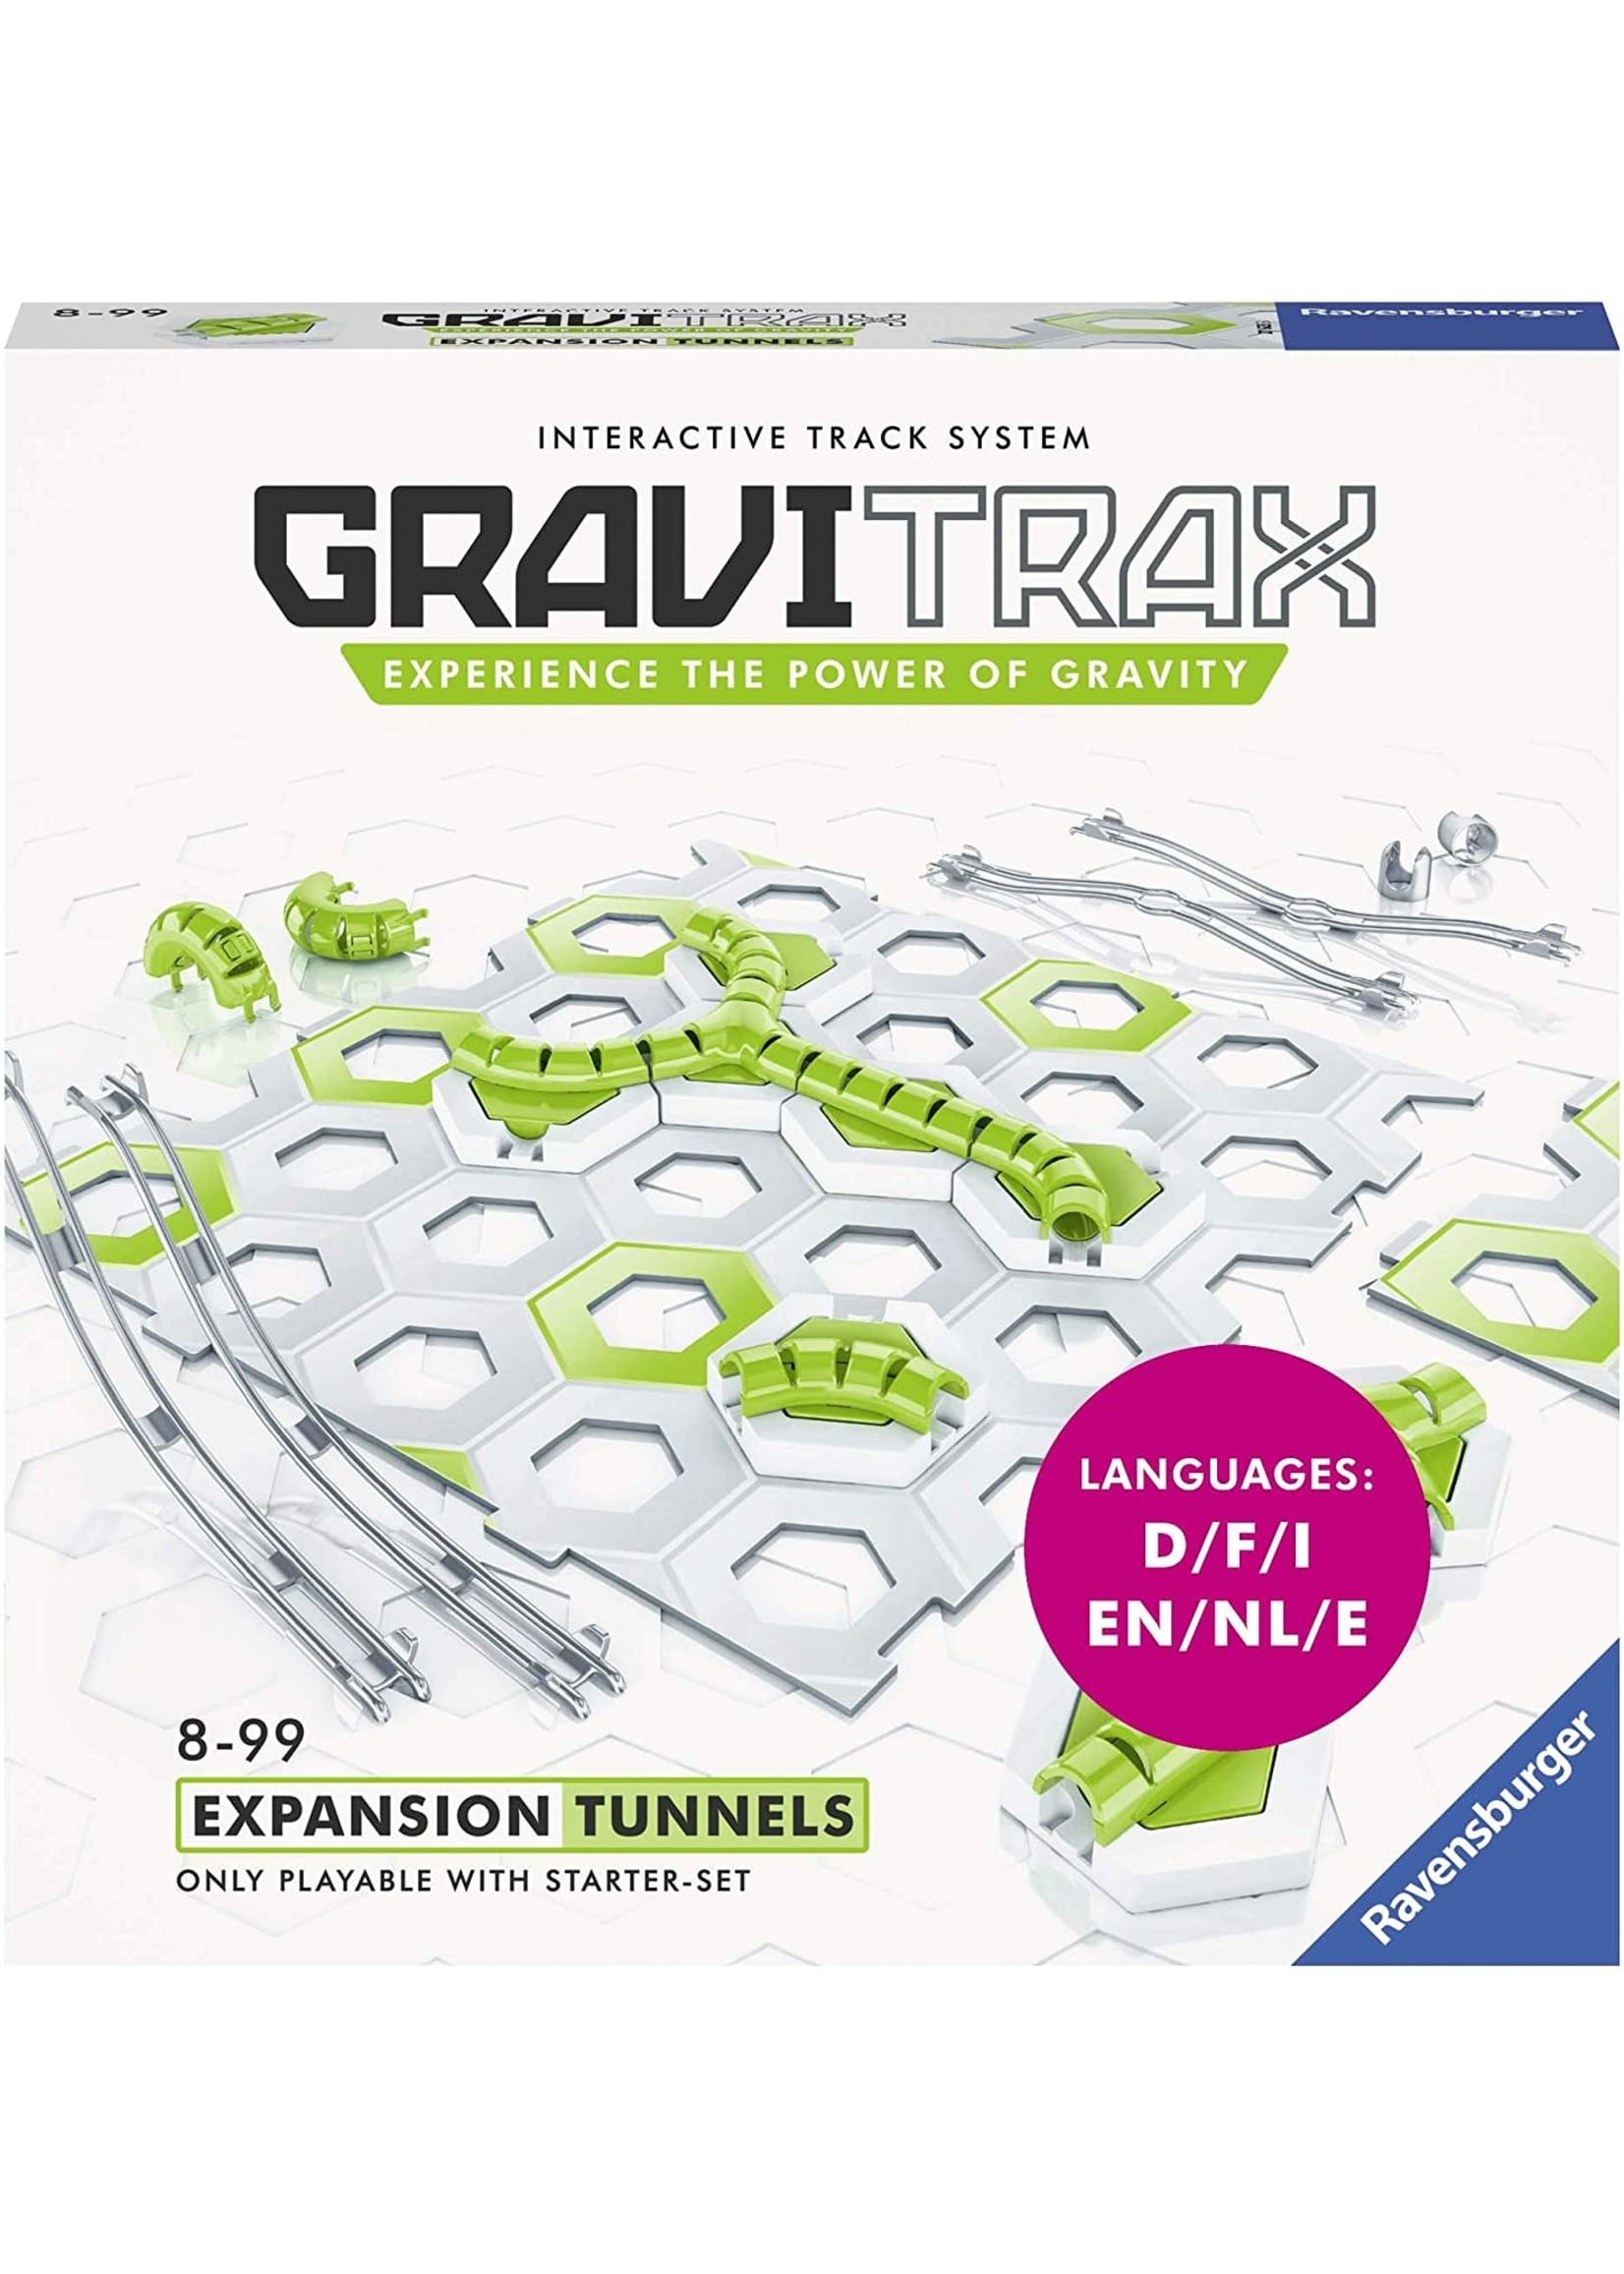 GraviTrax Building Expansion